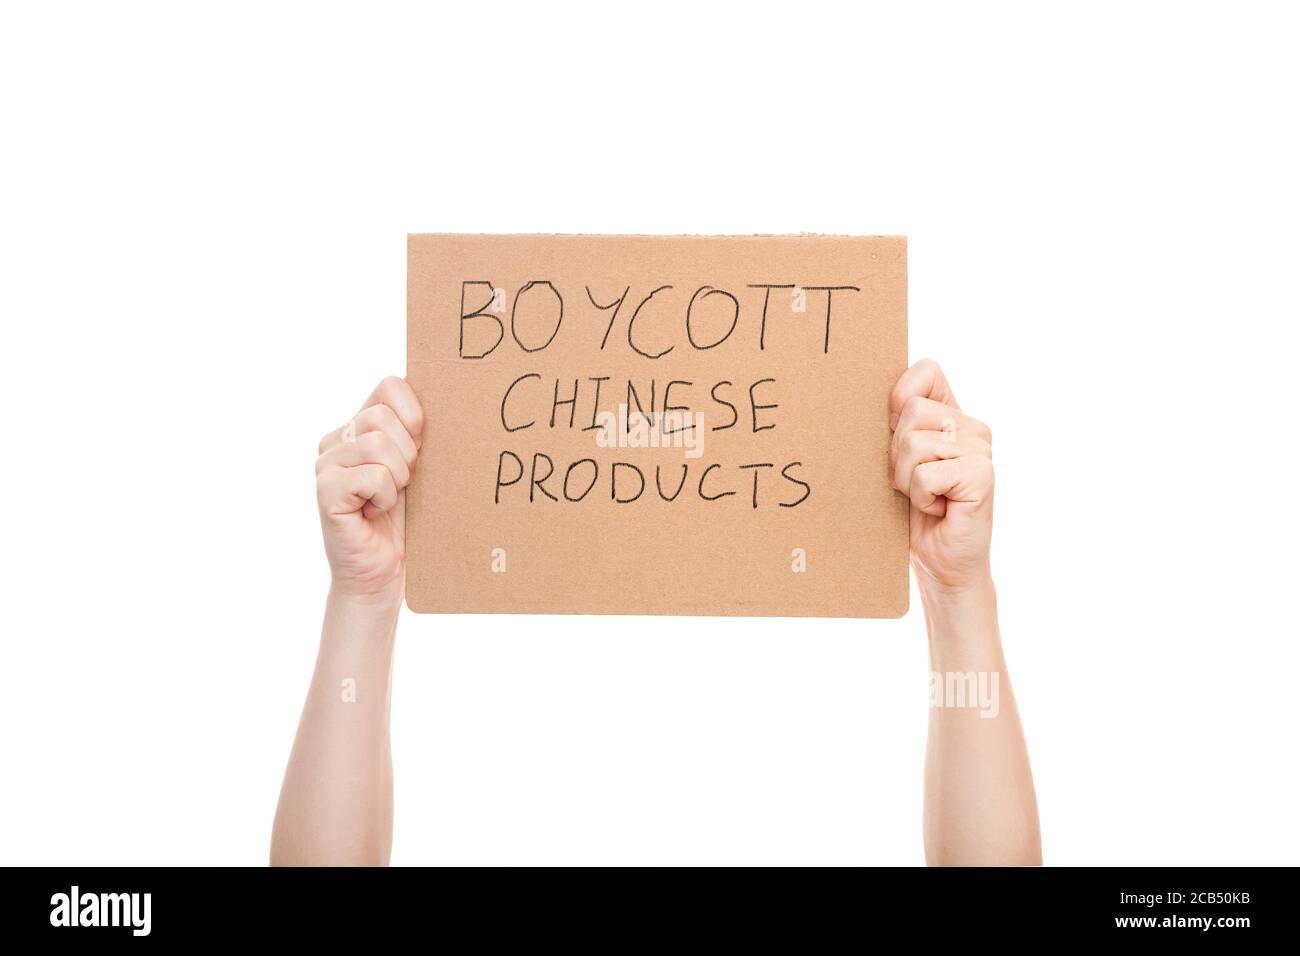 protest poster in the hands of a faceless man with a message to boycott Chinese products, cardboard with manifest text isolated on white background. Stock Photo